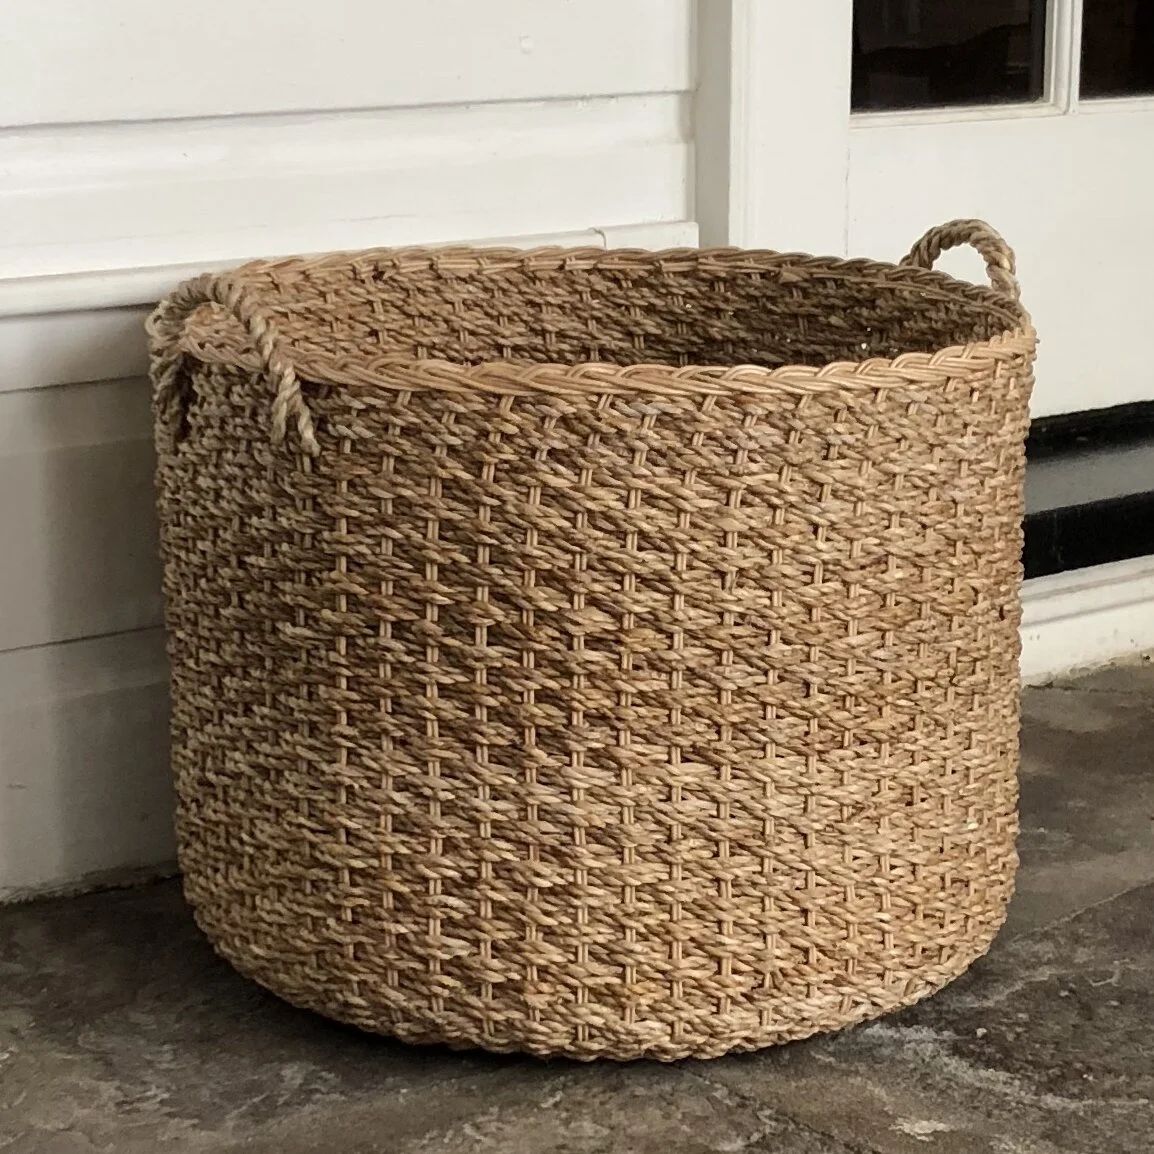 12.5" H x 16" W x 16" D Handwoven Wicker/Rattan Basket, Fits great on a shelf or counter top, Ove... | Walmart (US)